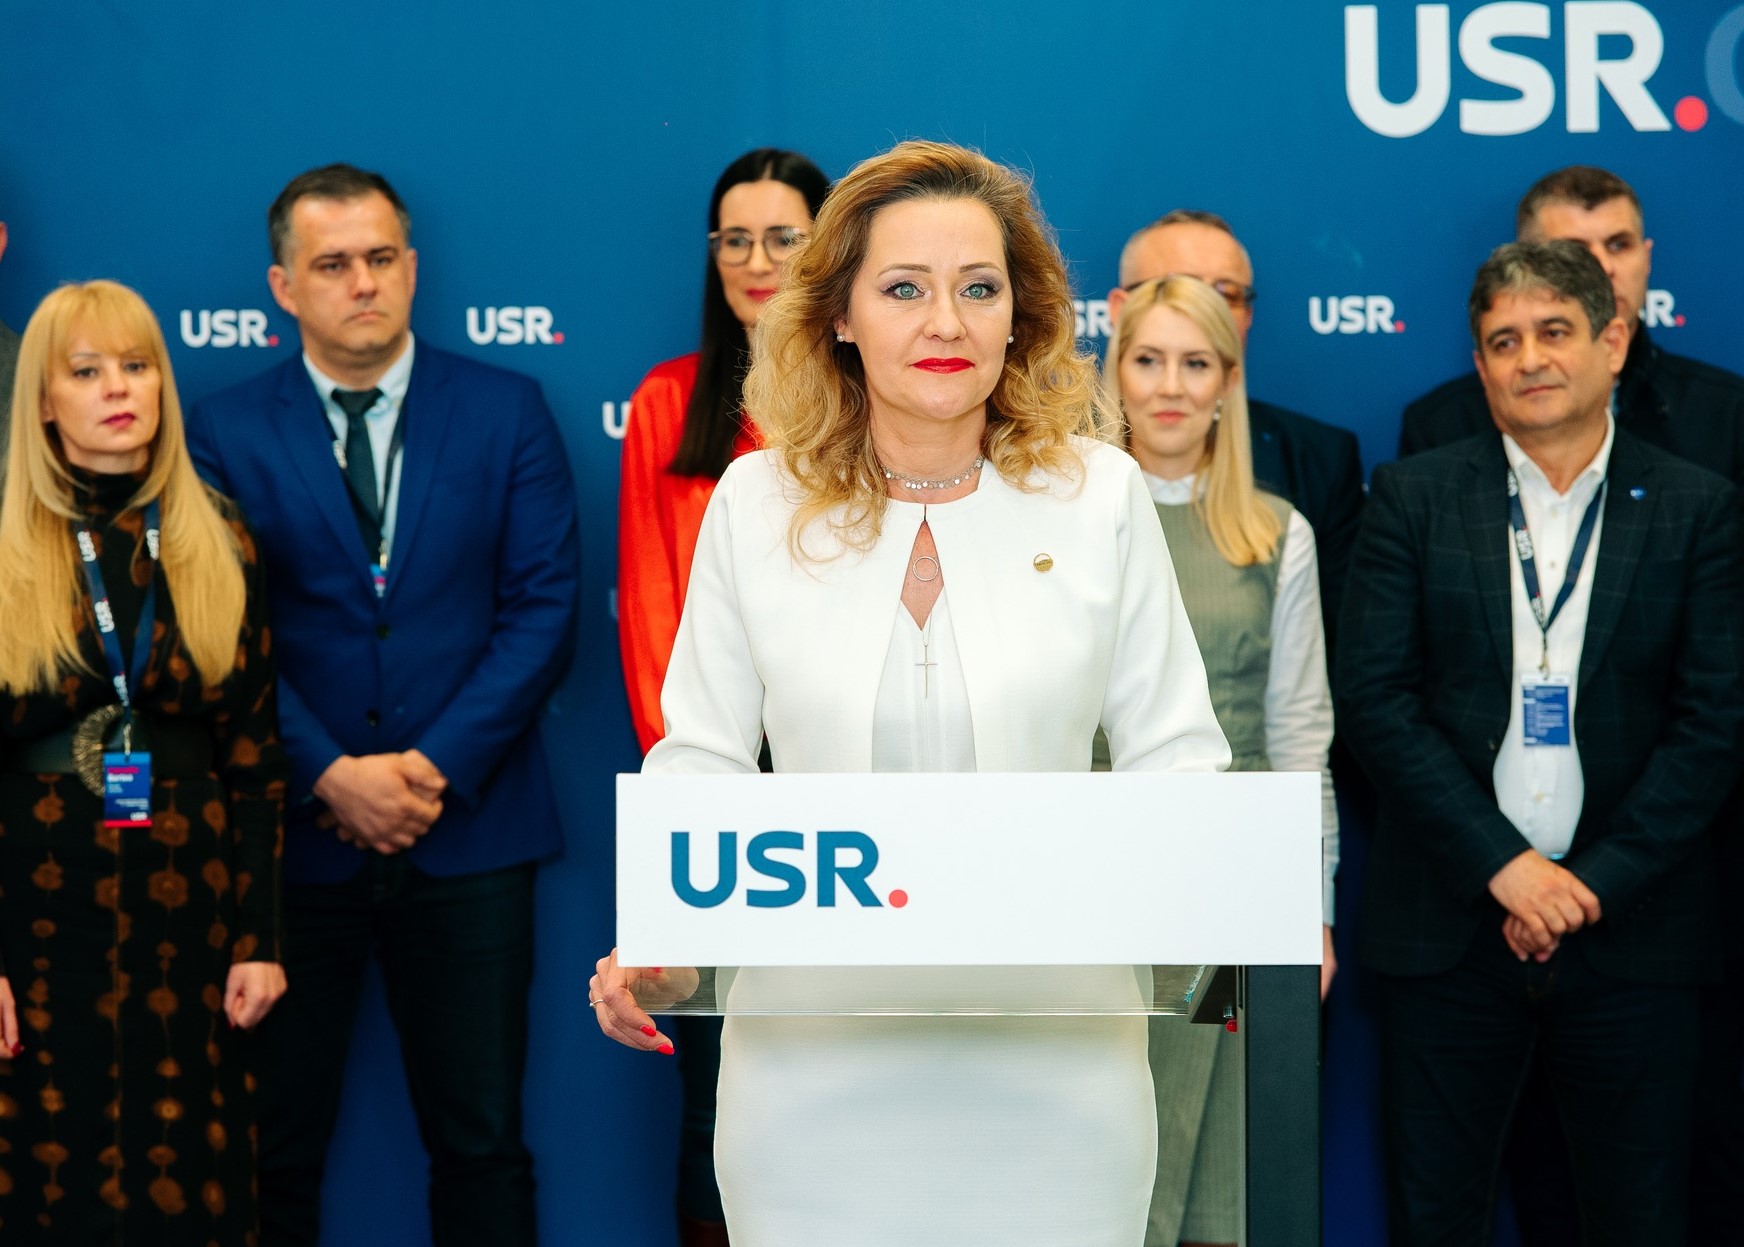 Elena Lasconi Wins USR Presidency in First Round with 68% Votes